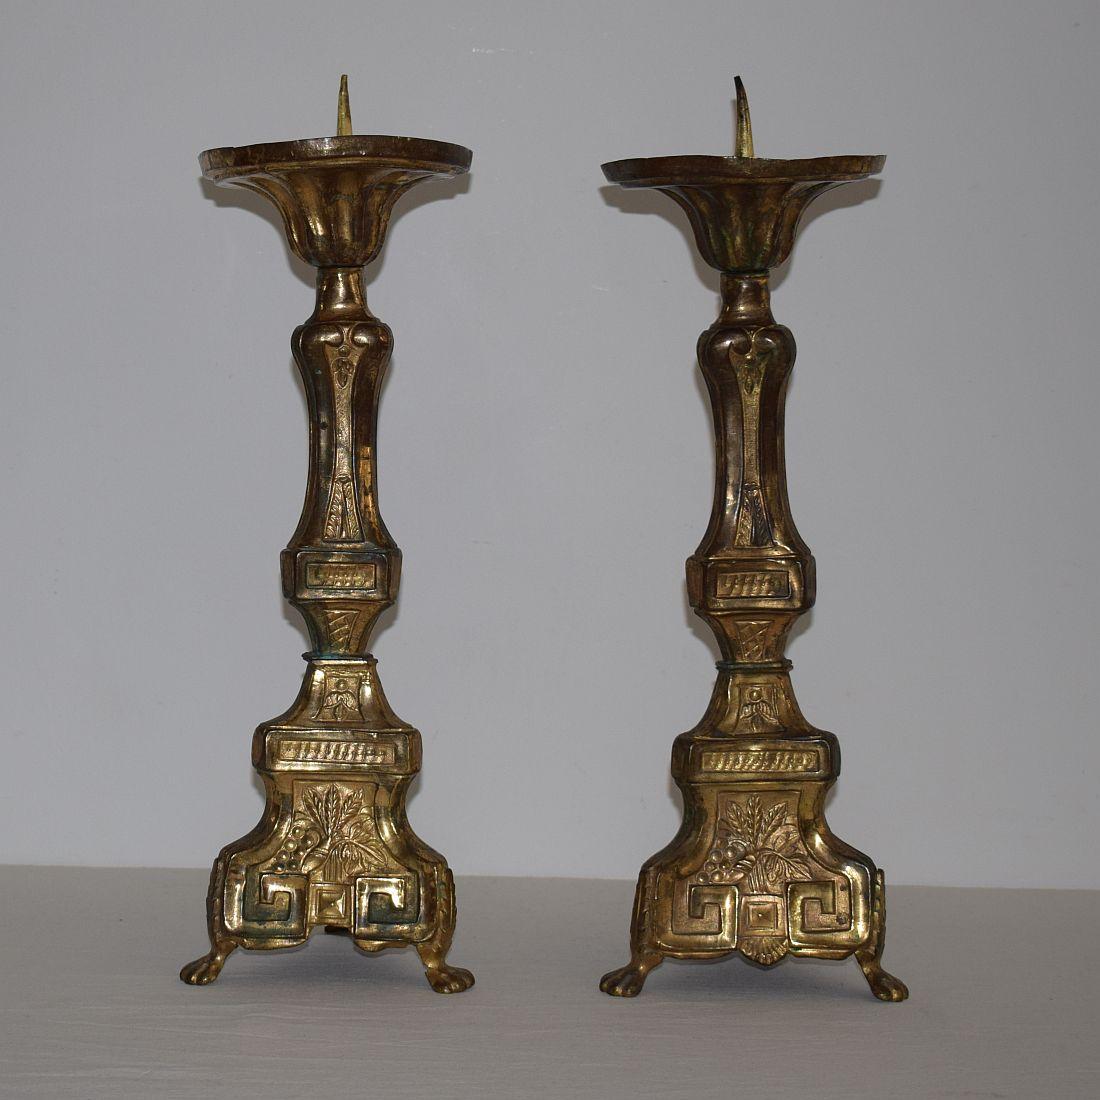 Gilt Pair of Late 18th Century French Louis XVI Fire Gilded Brass Candlesticks